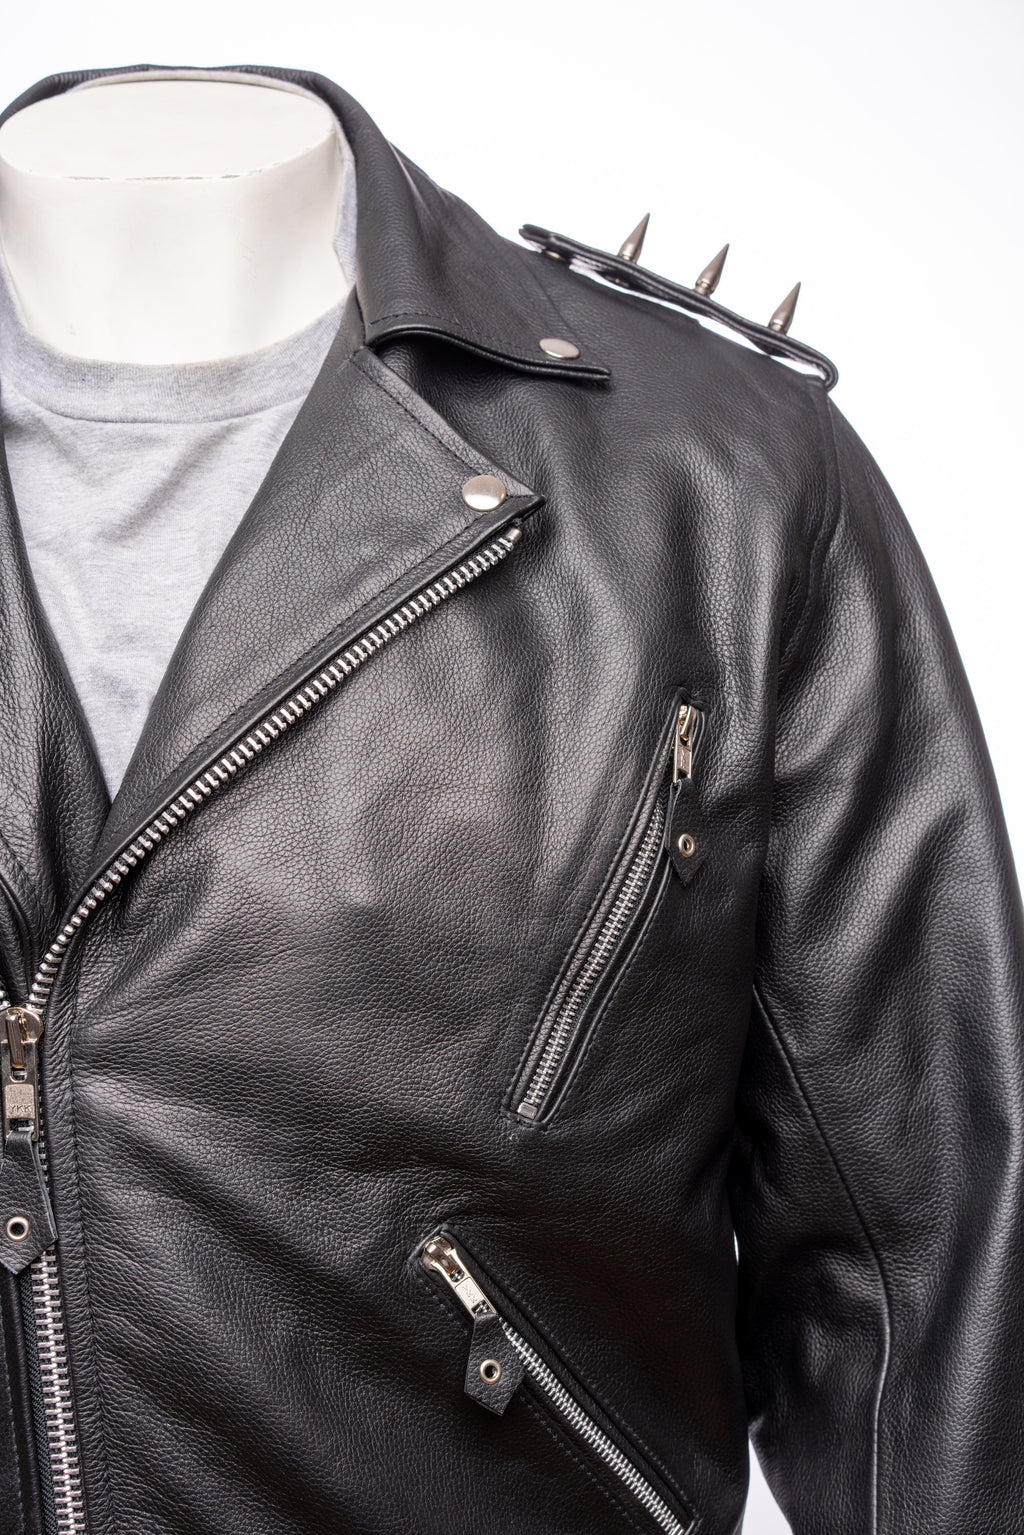 Men's Cow Hide Brando Style Jacket With Spike Detail: Sidney